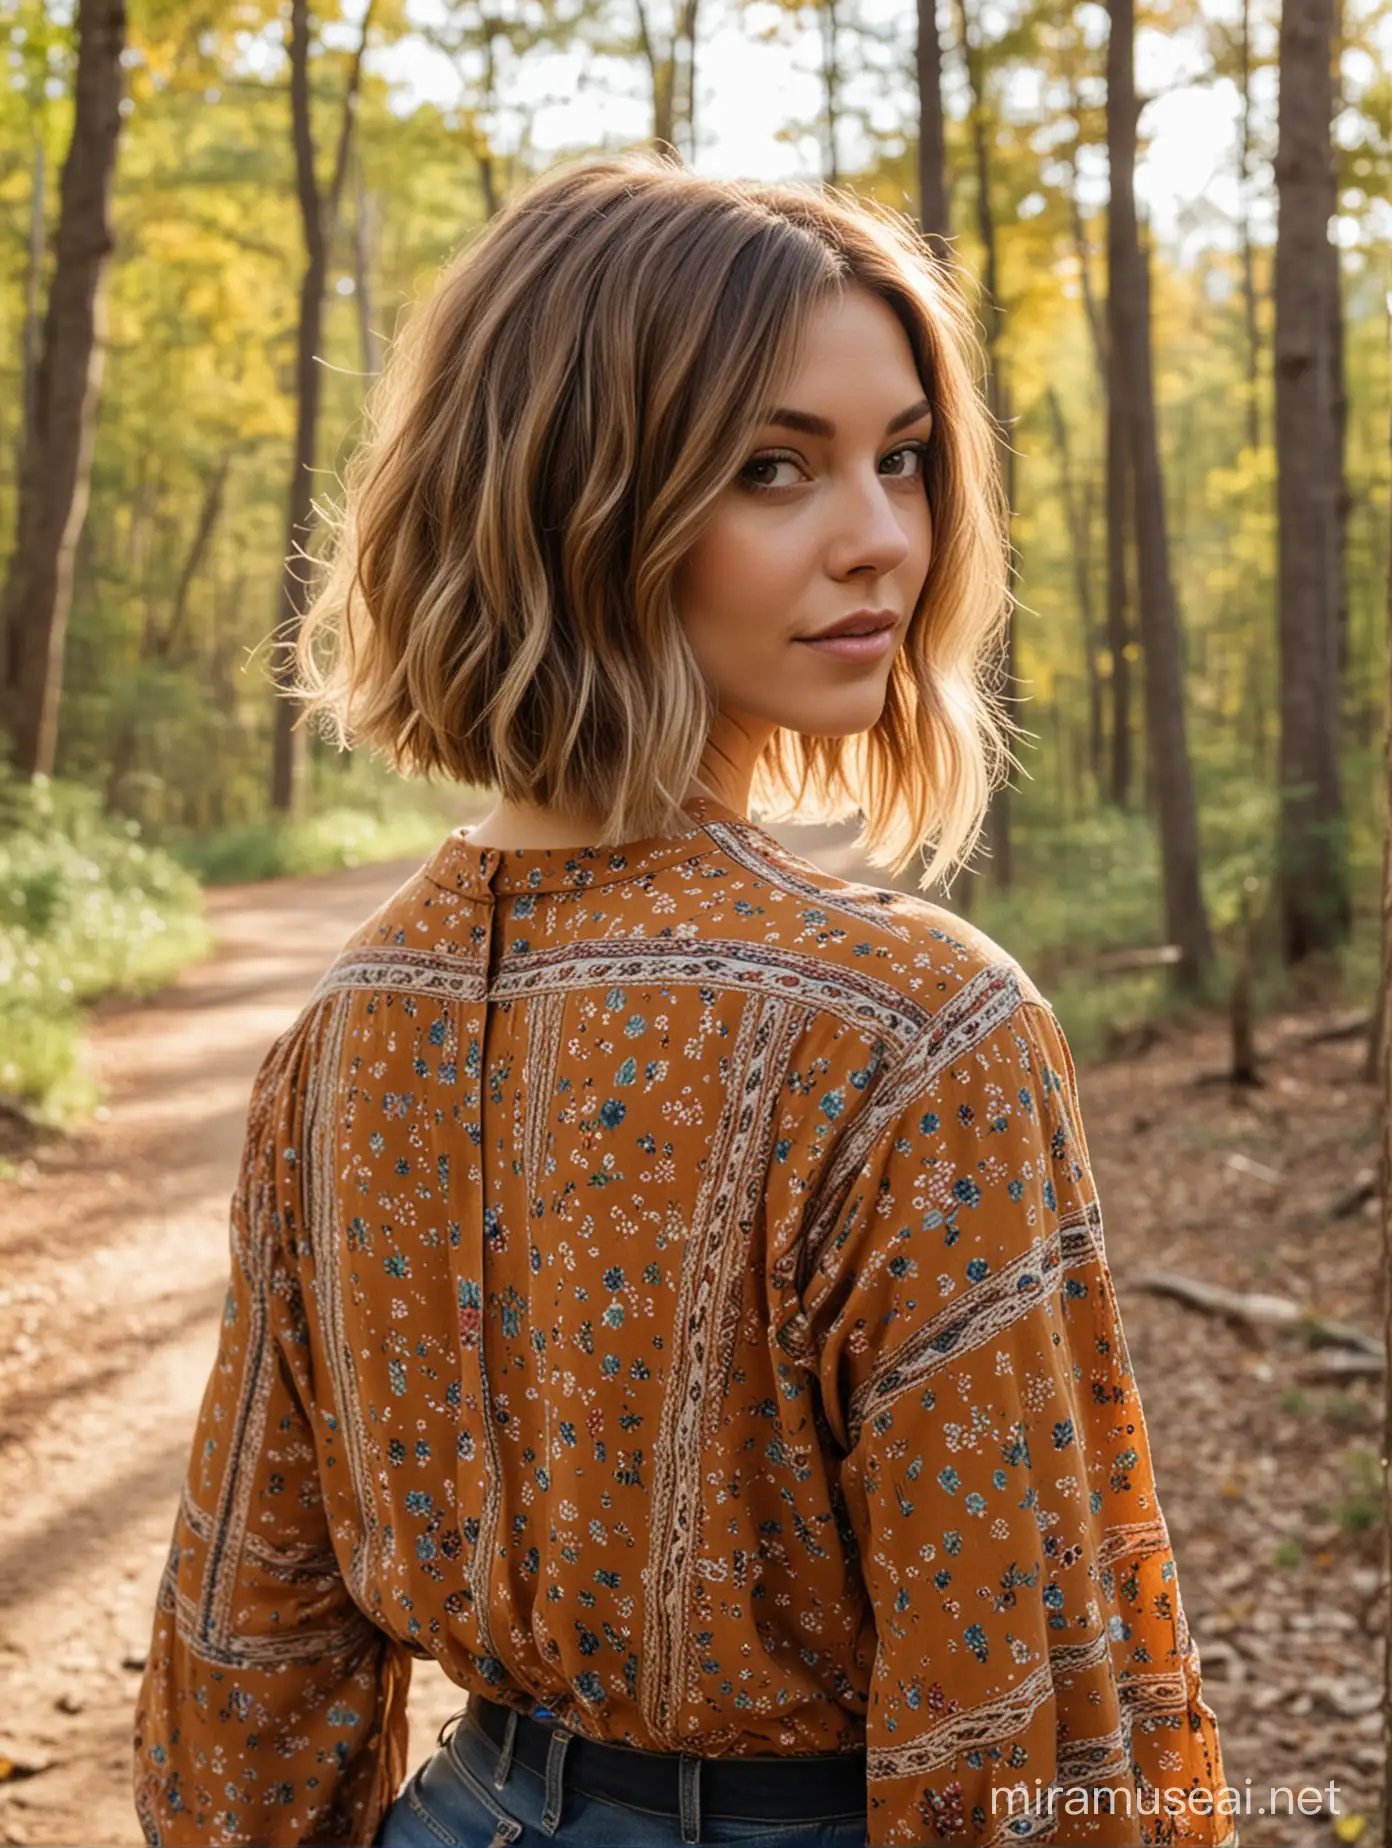 a colorful photo of a country quirky bohemian woman out in the country woods with her back turned to the camera, while she is looking back at the camera. The woman also has light brown hair in a medium cut bob hairstyle.